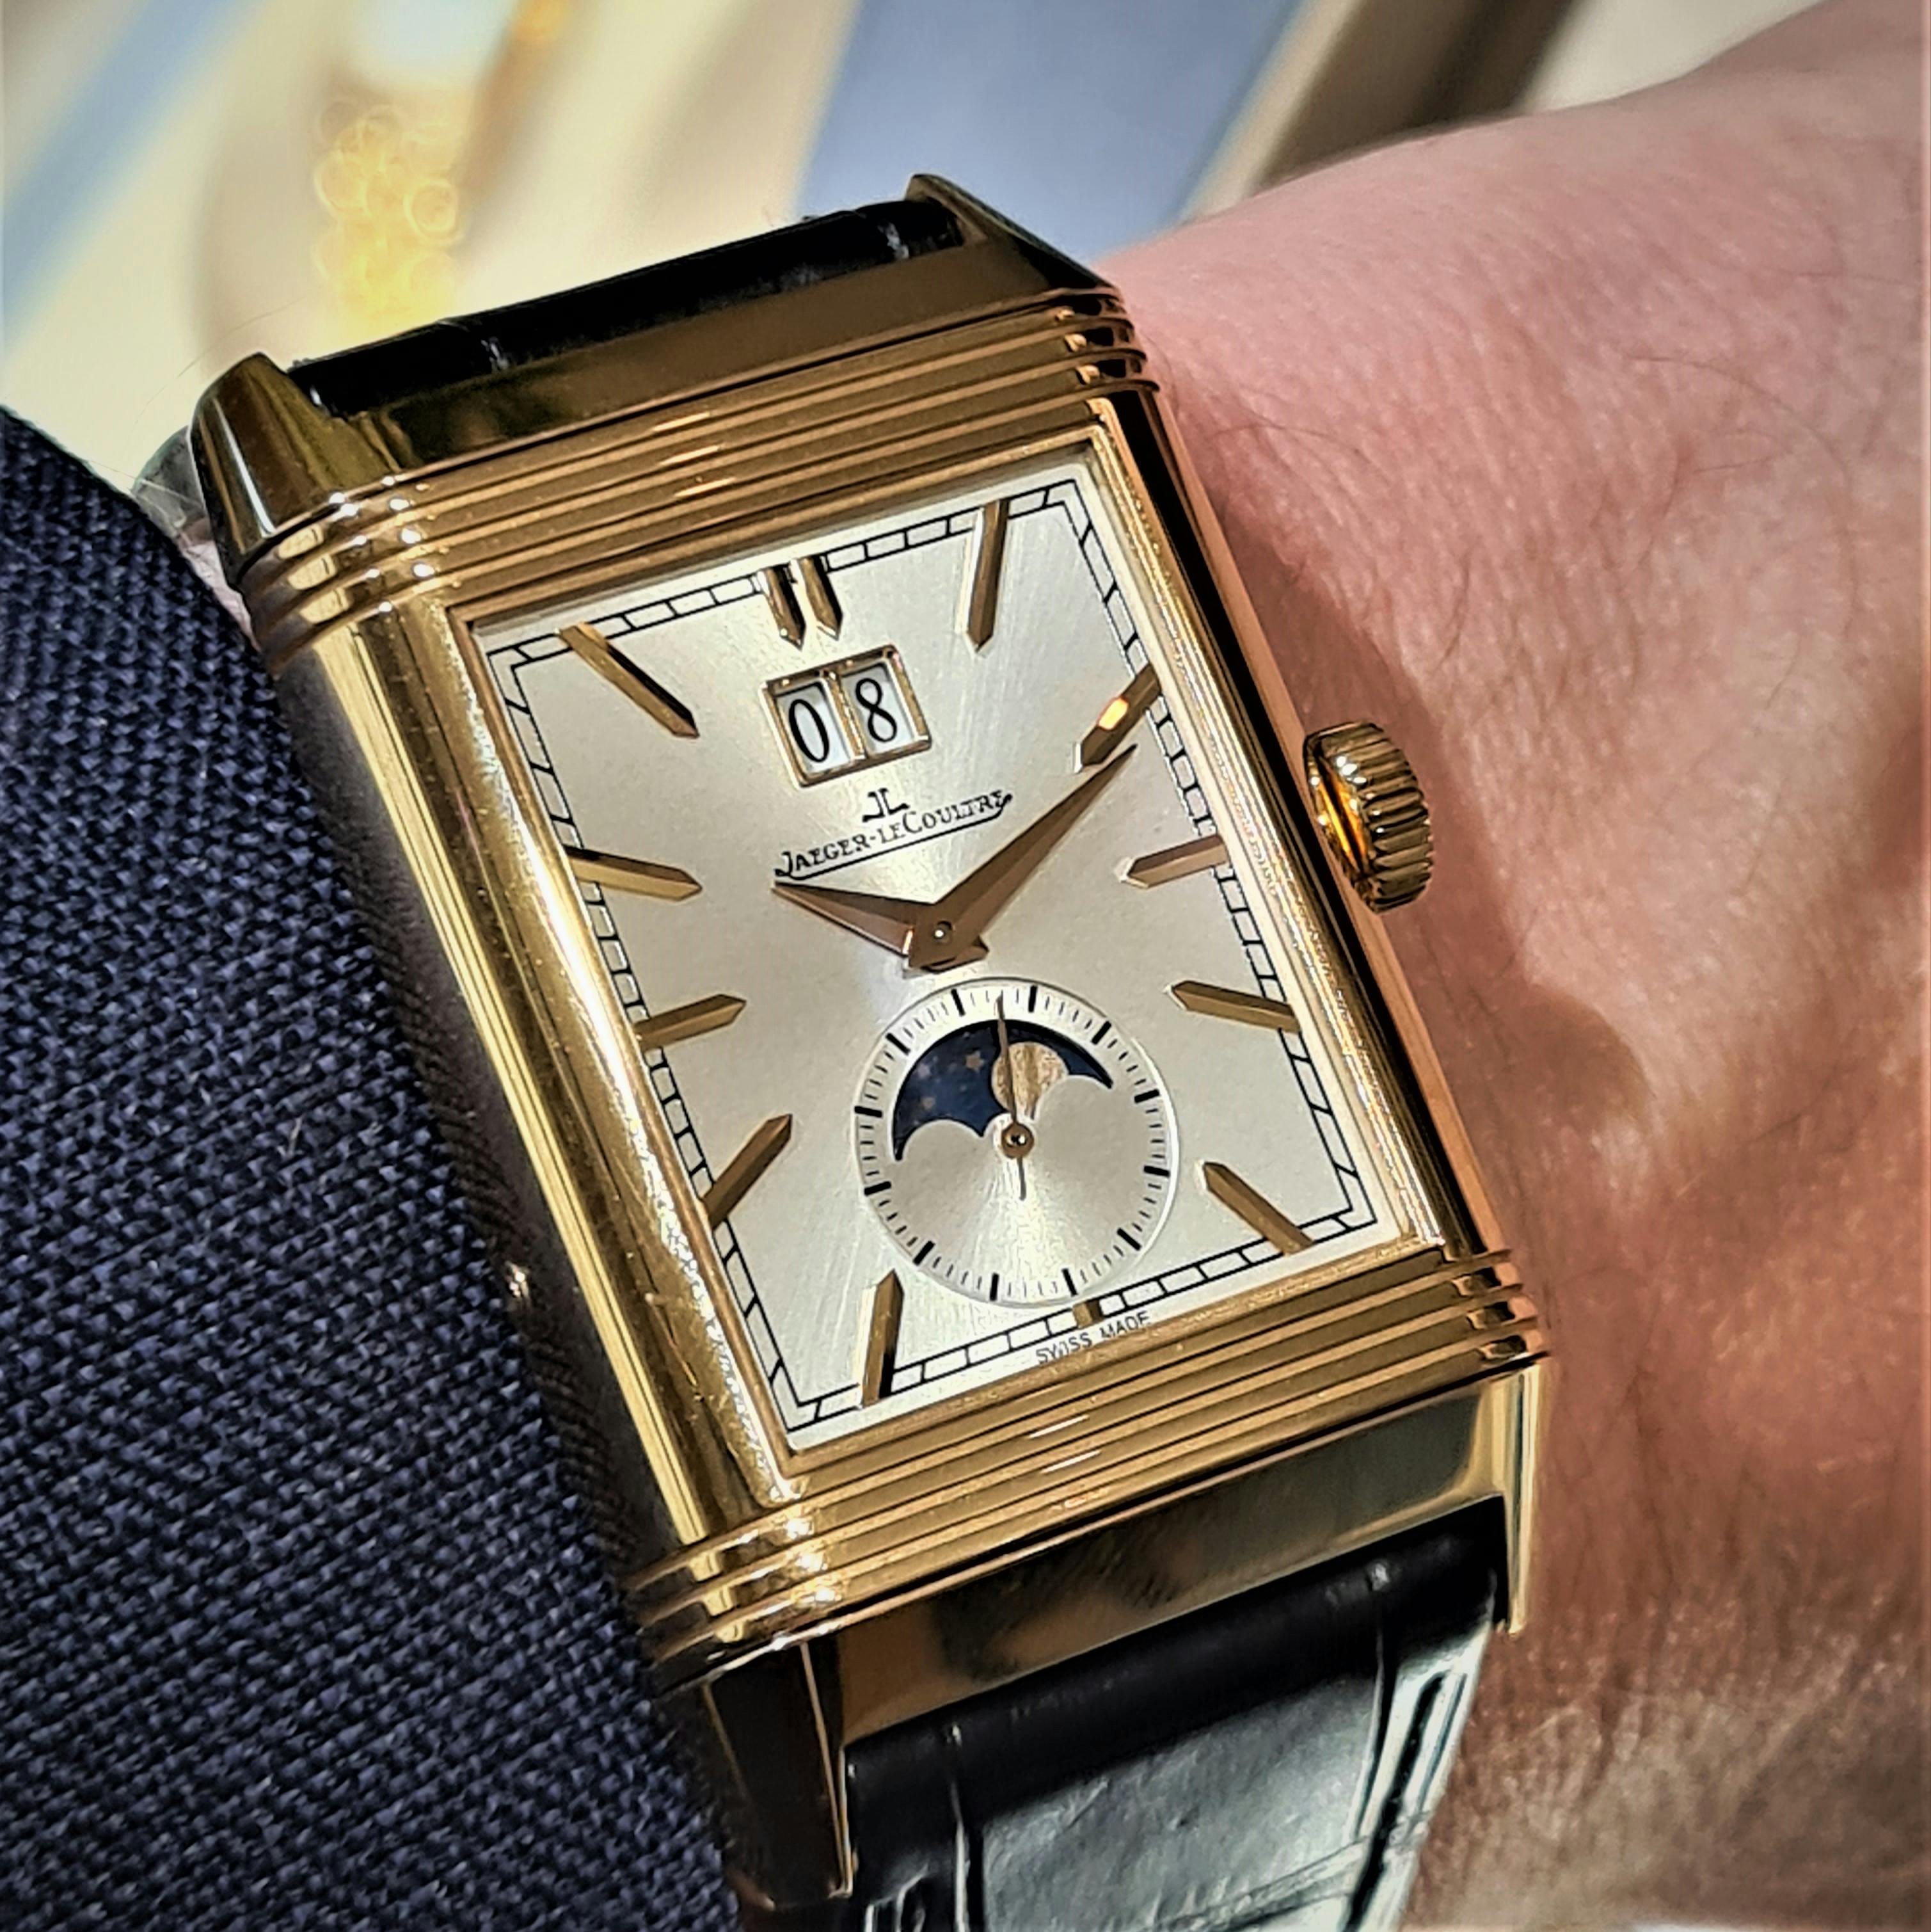 Gold rectangular wristwatch with silver dial and gold hands